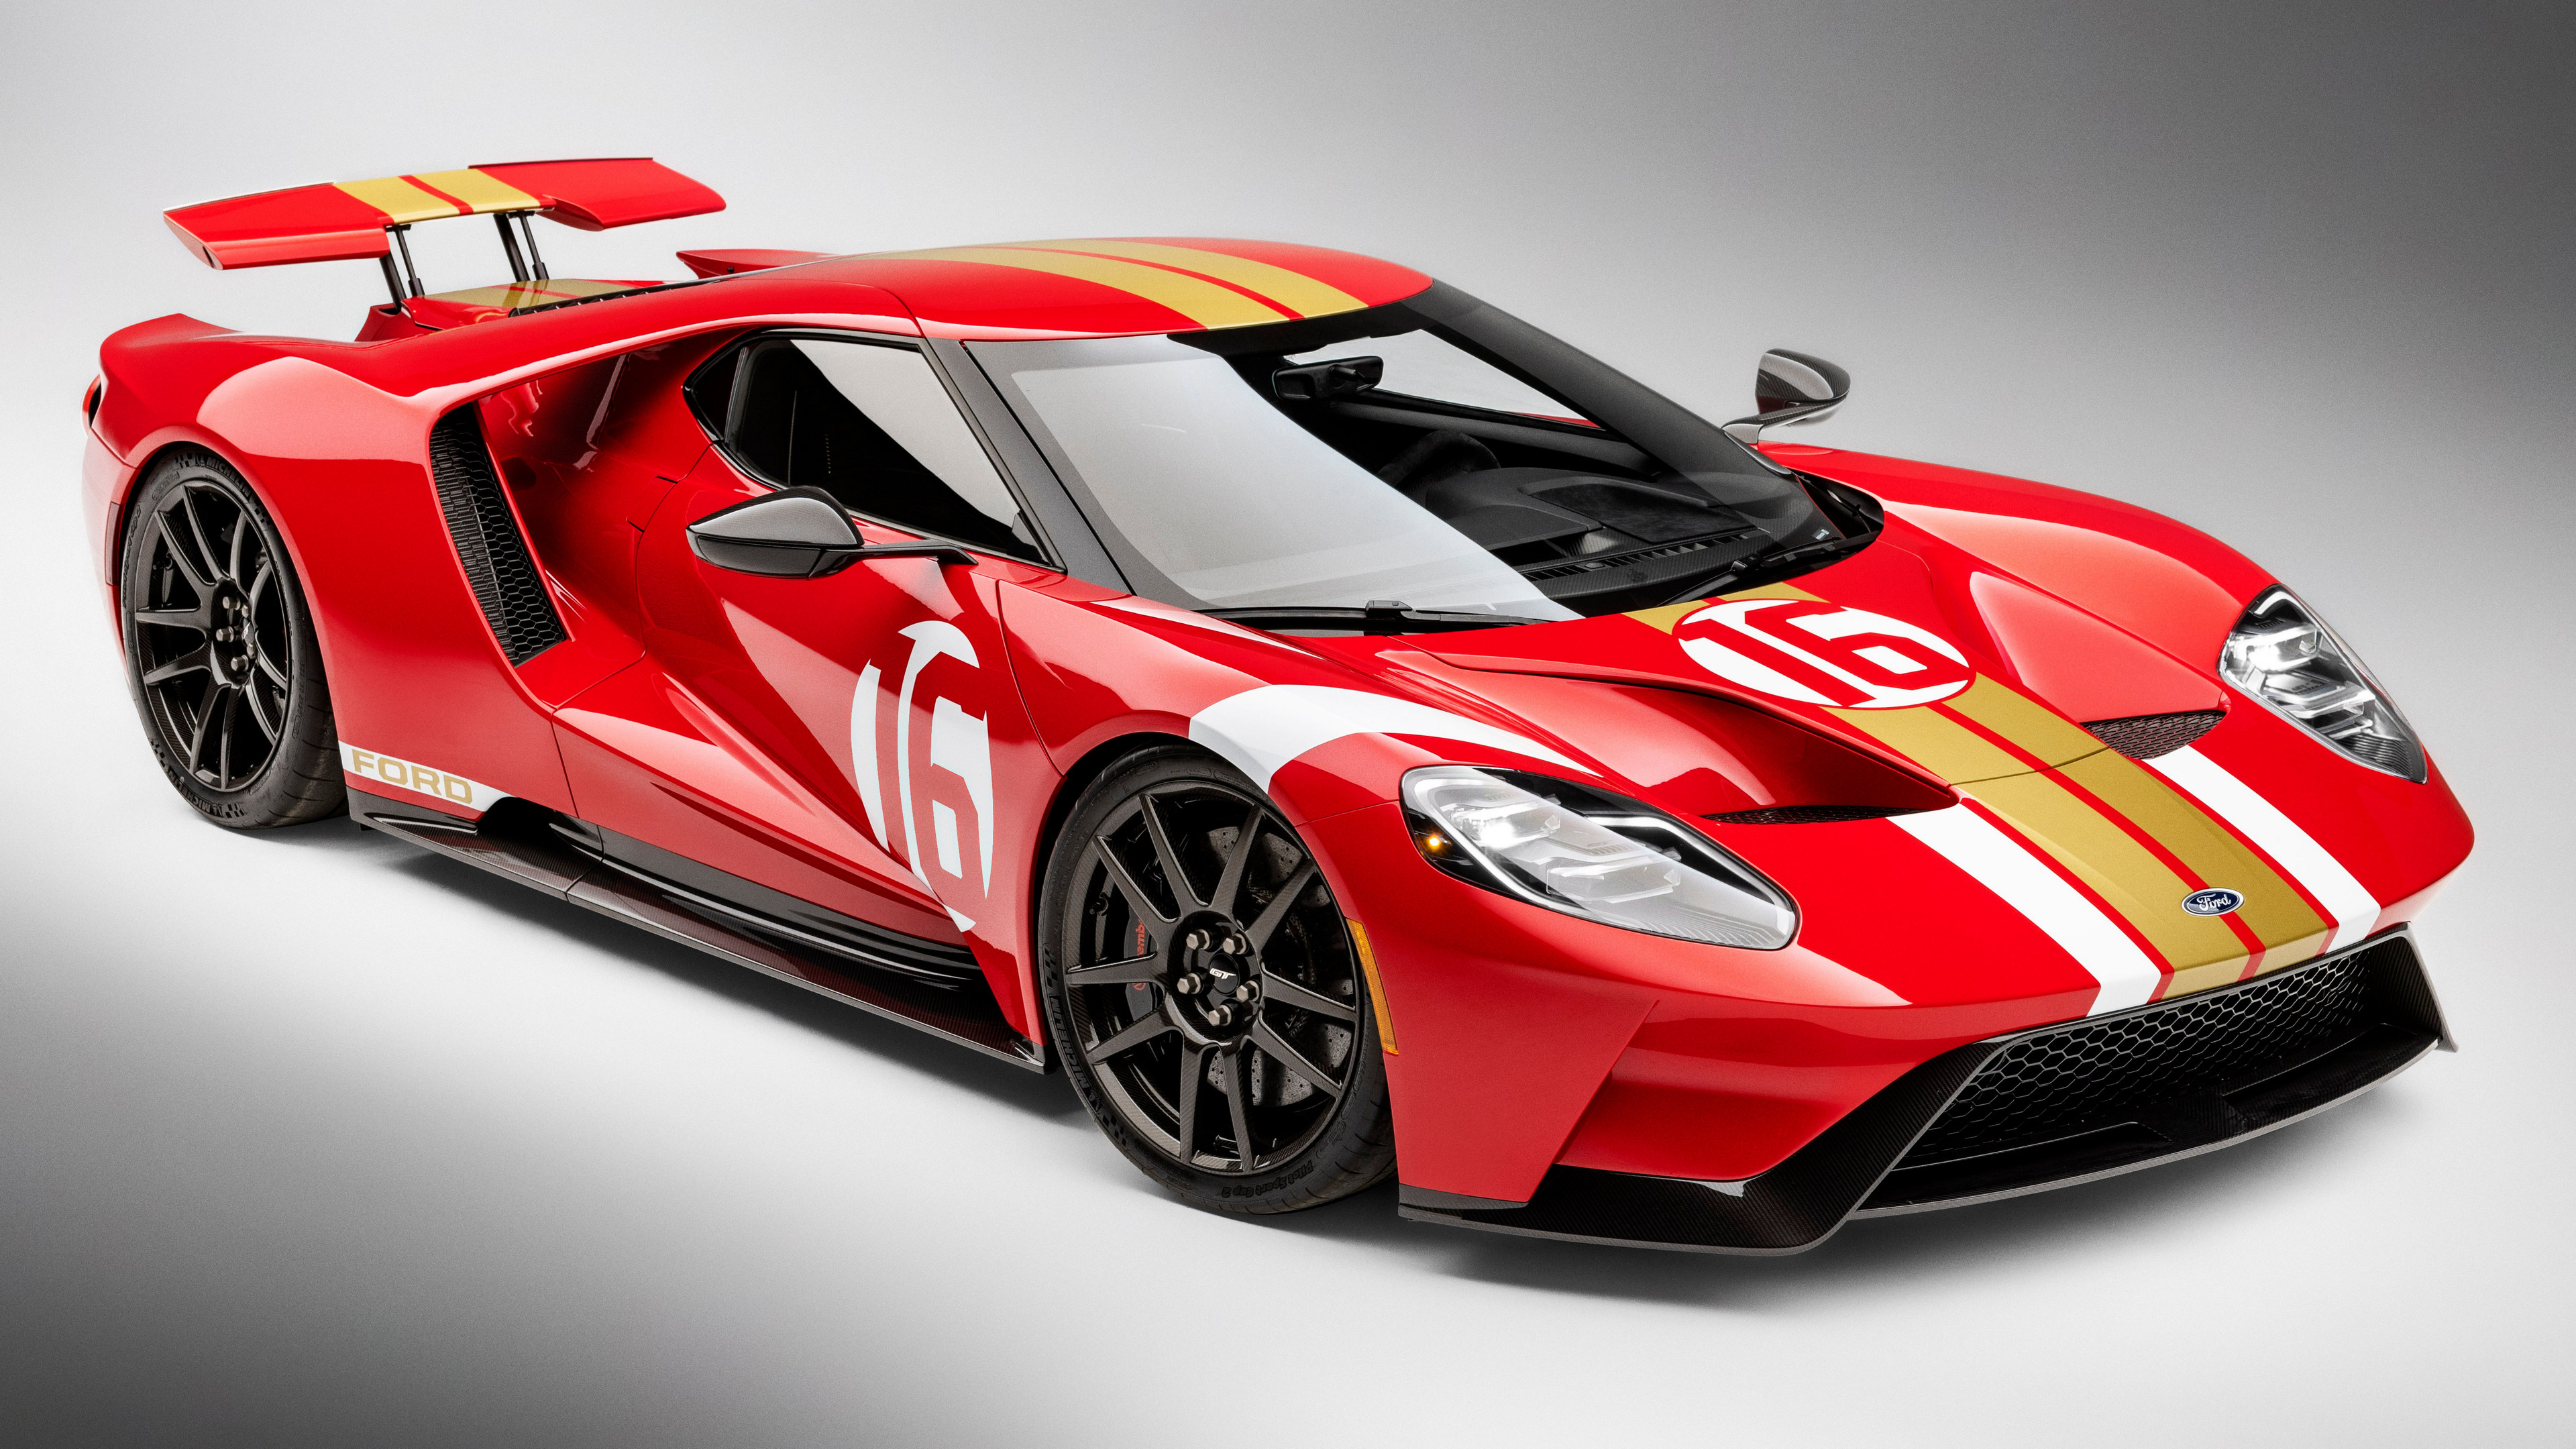 General 3840x2160 Ford GT supercars simple background red Ford American cars vehicle red cars car sports car